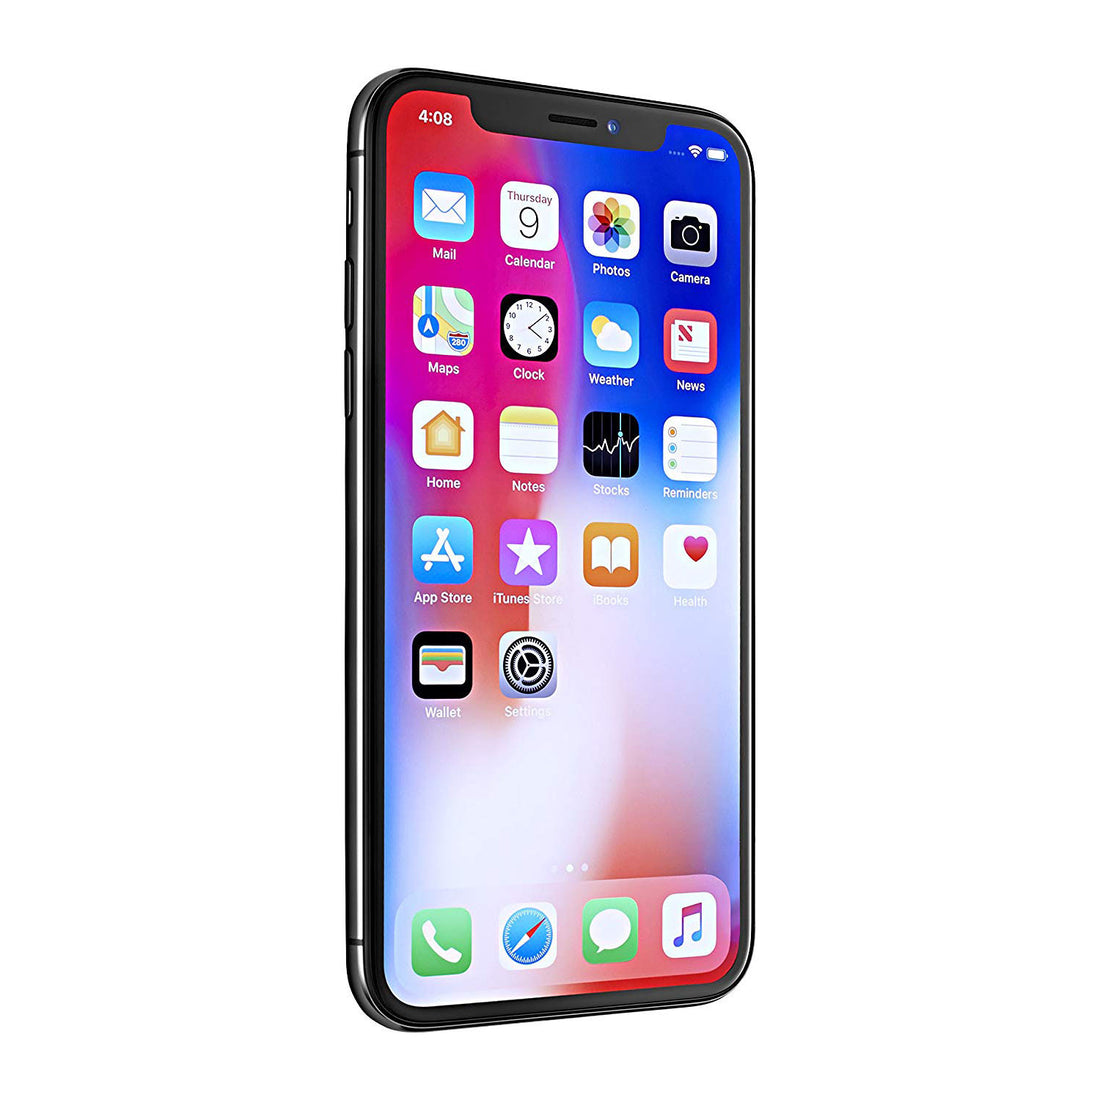 Apple iPhone X Smartphone, 5.8-Inch, 256GB, Unlocked All Carriers - Space Gray (Refurbished)